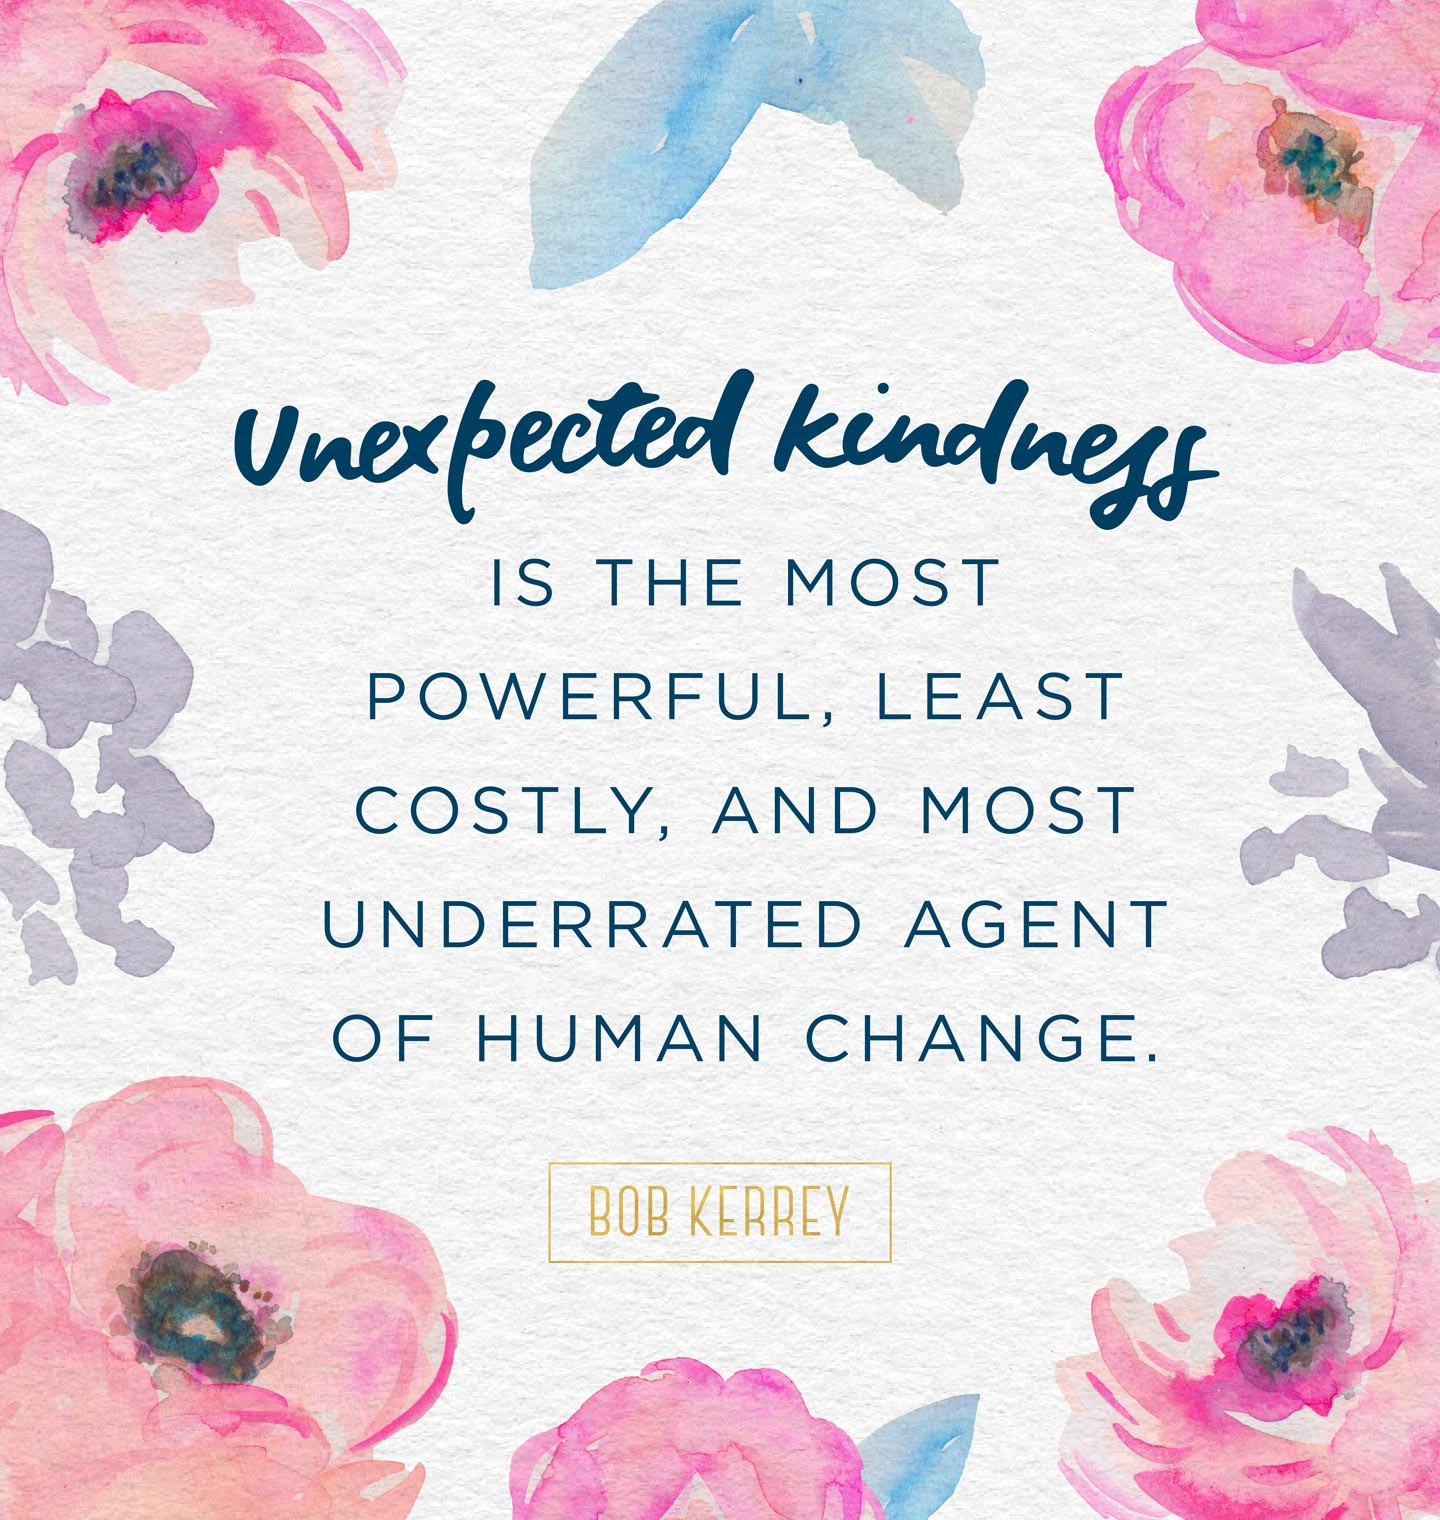 Quotes Of Kindness
 30 Inspiring Kindness Quotes That Will Enlighten You FTD